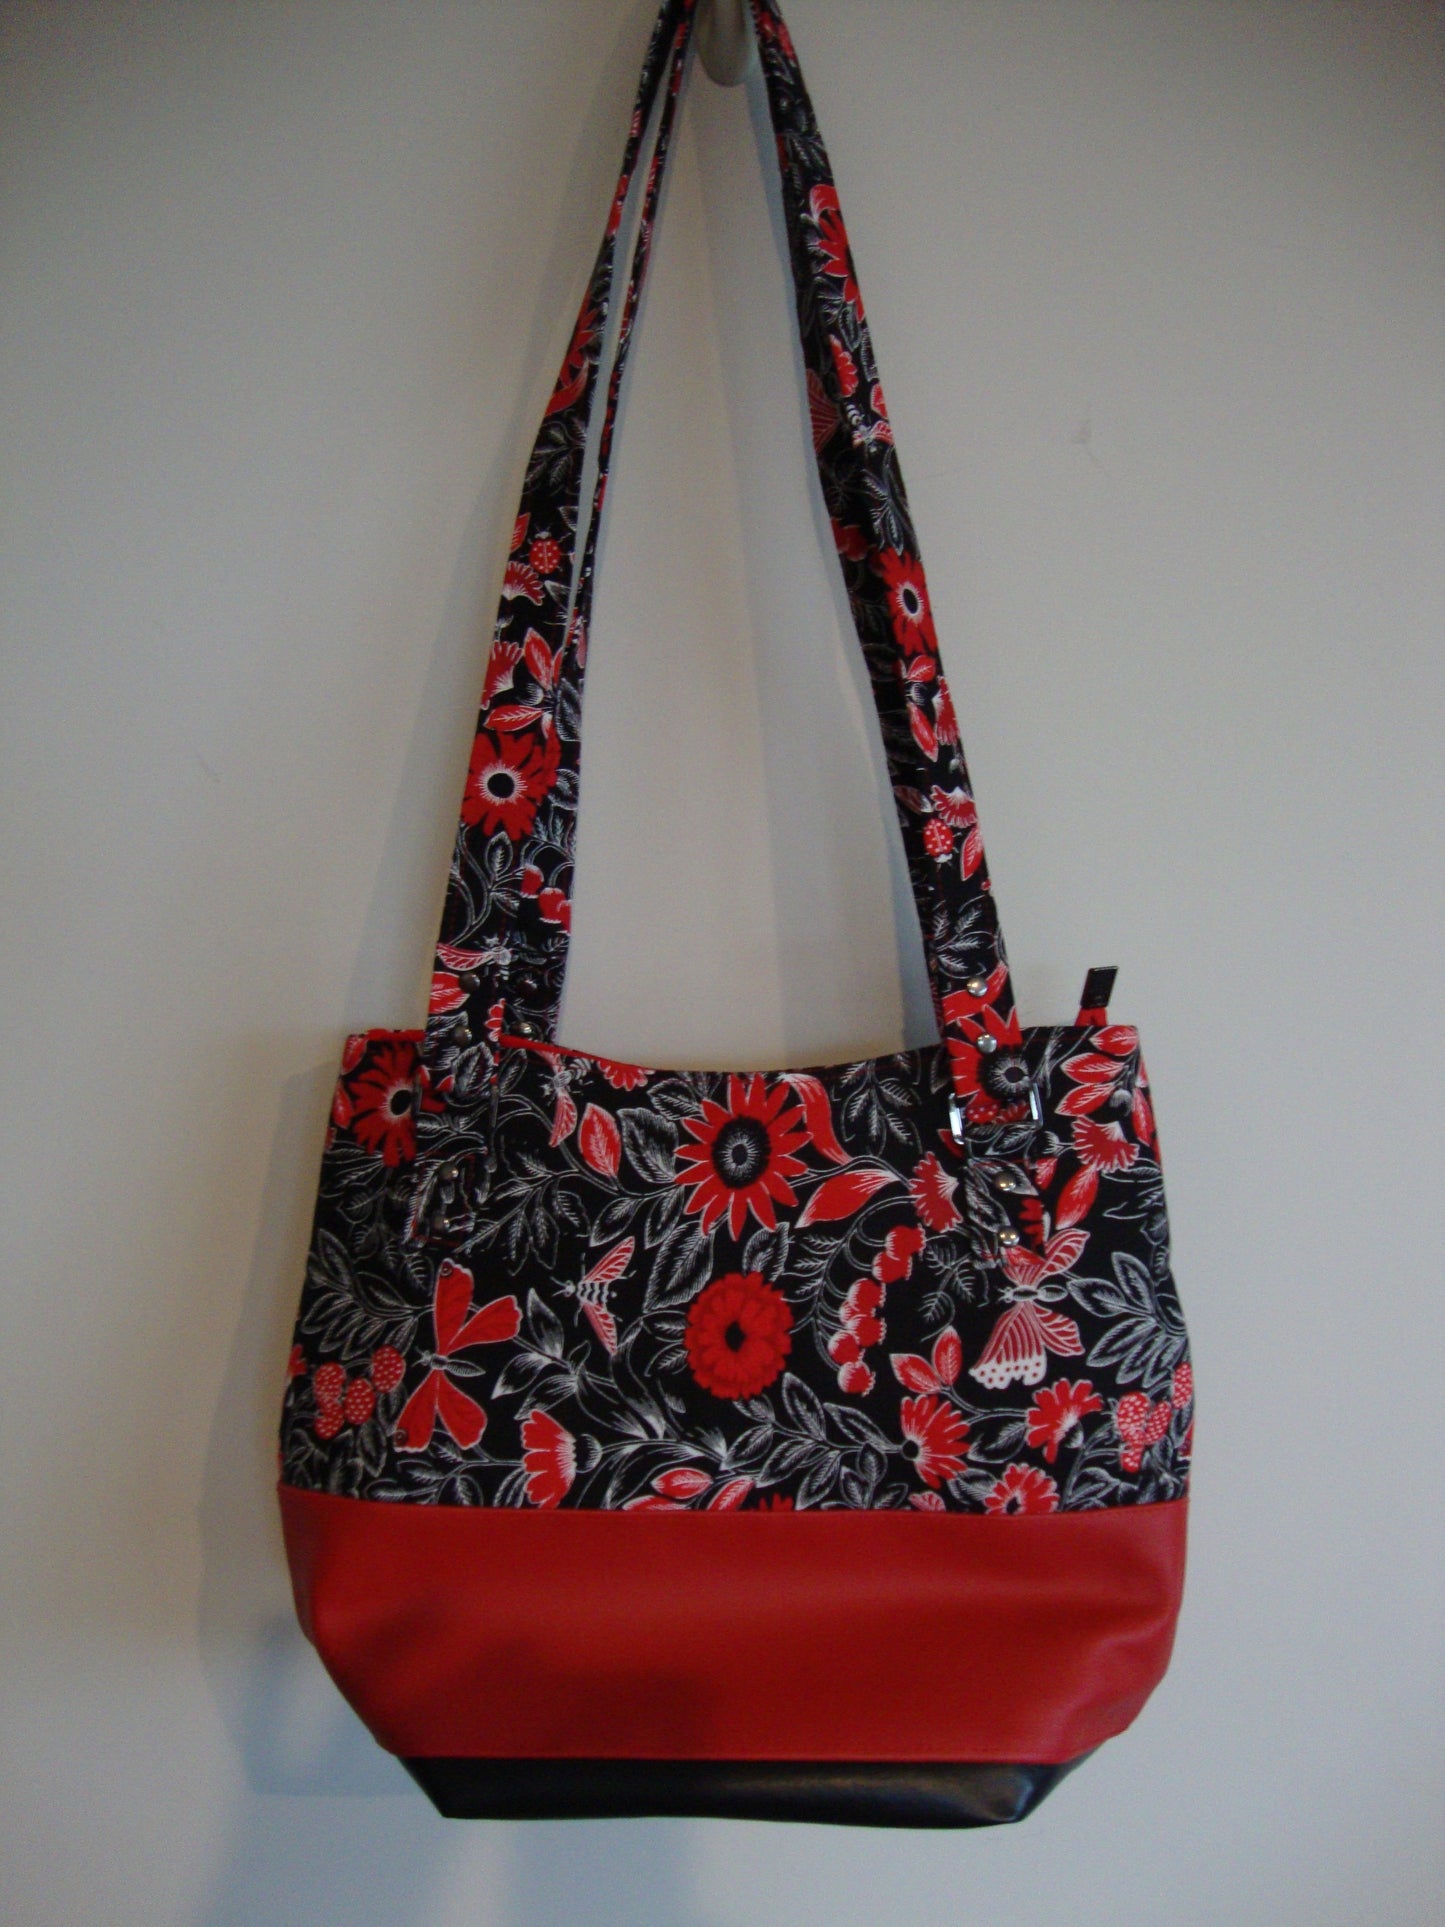 Red flower with black background with Red and Black Vinyl Tote Bag